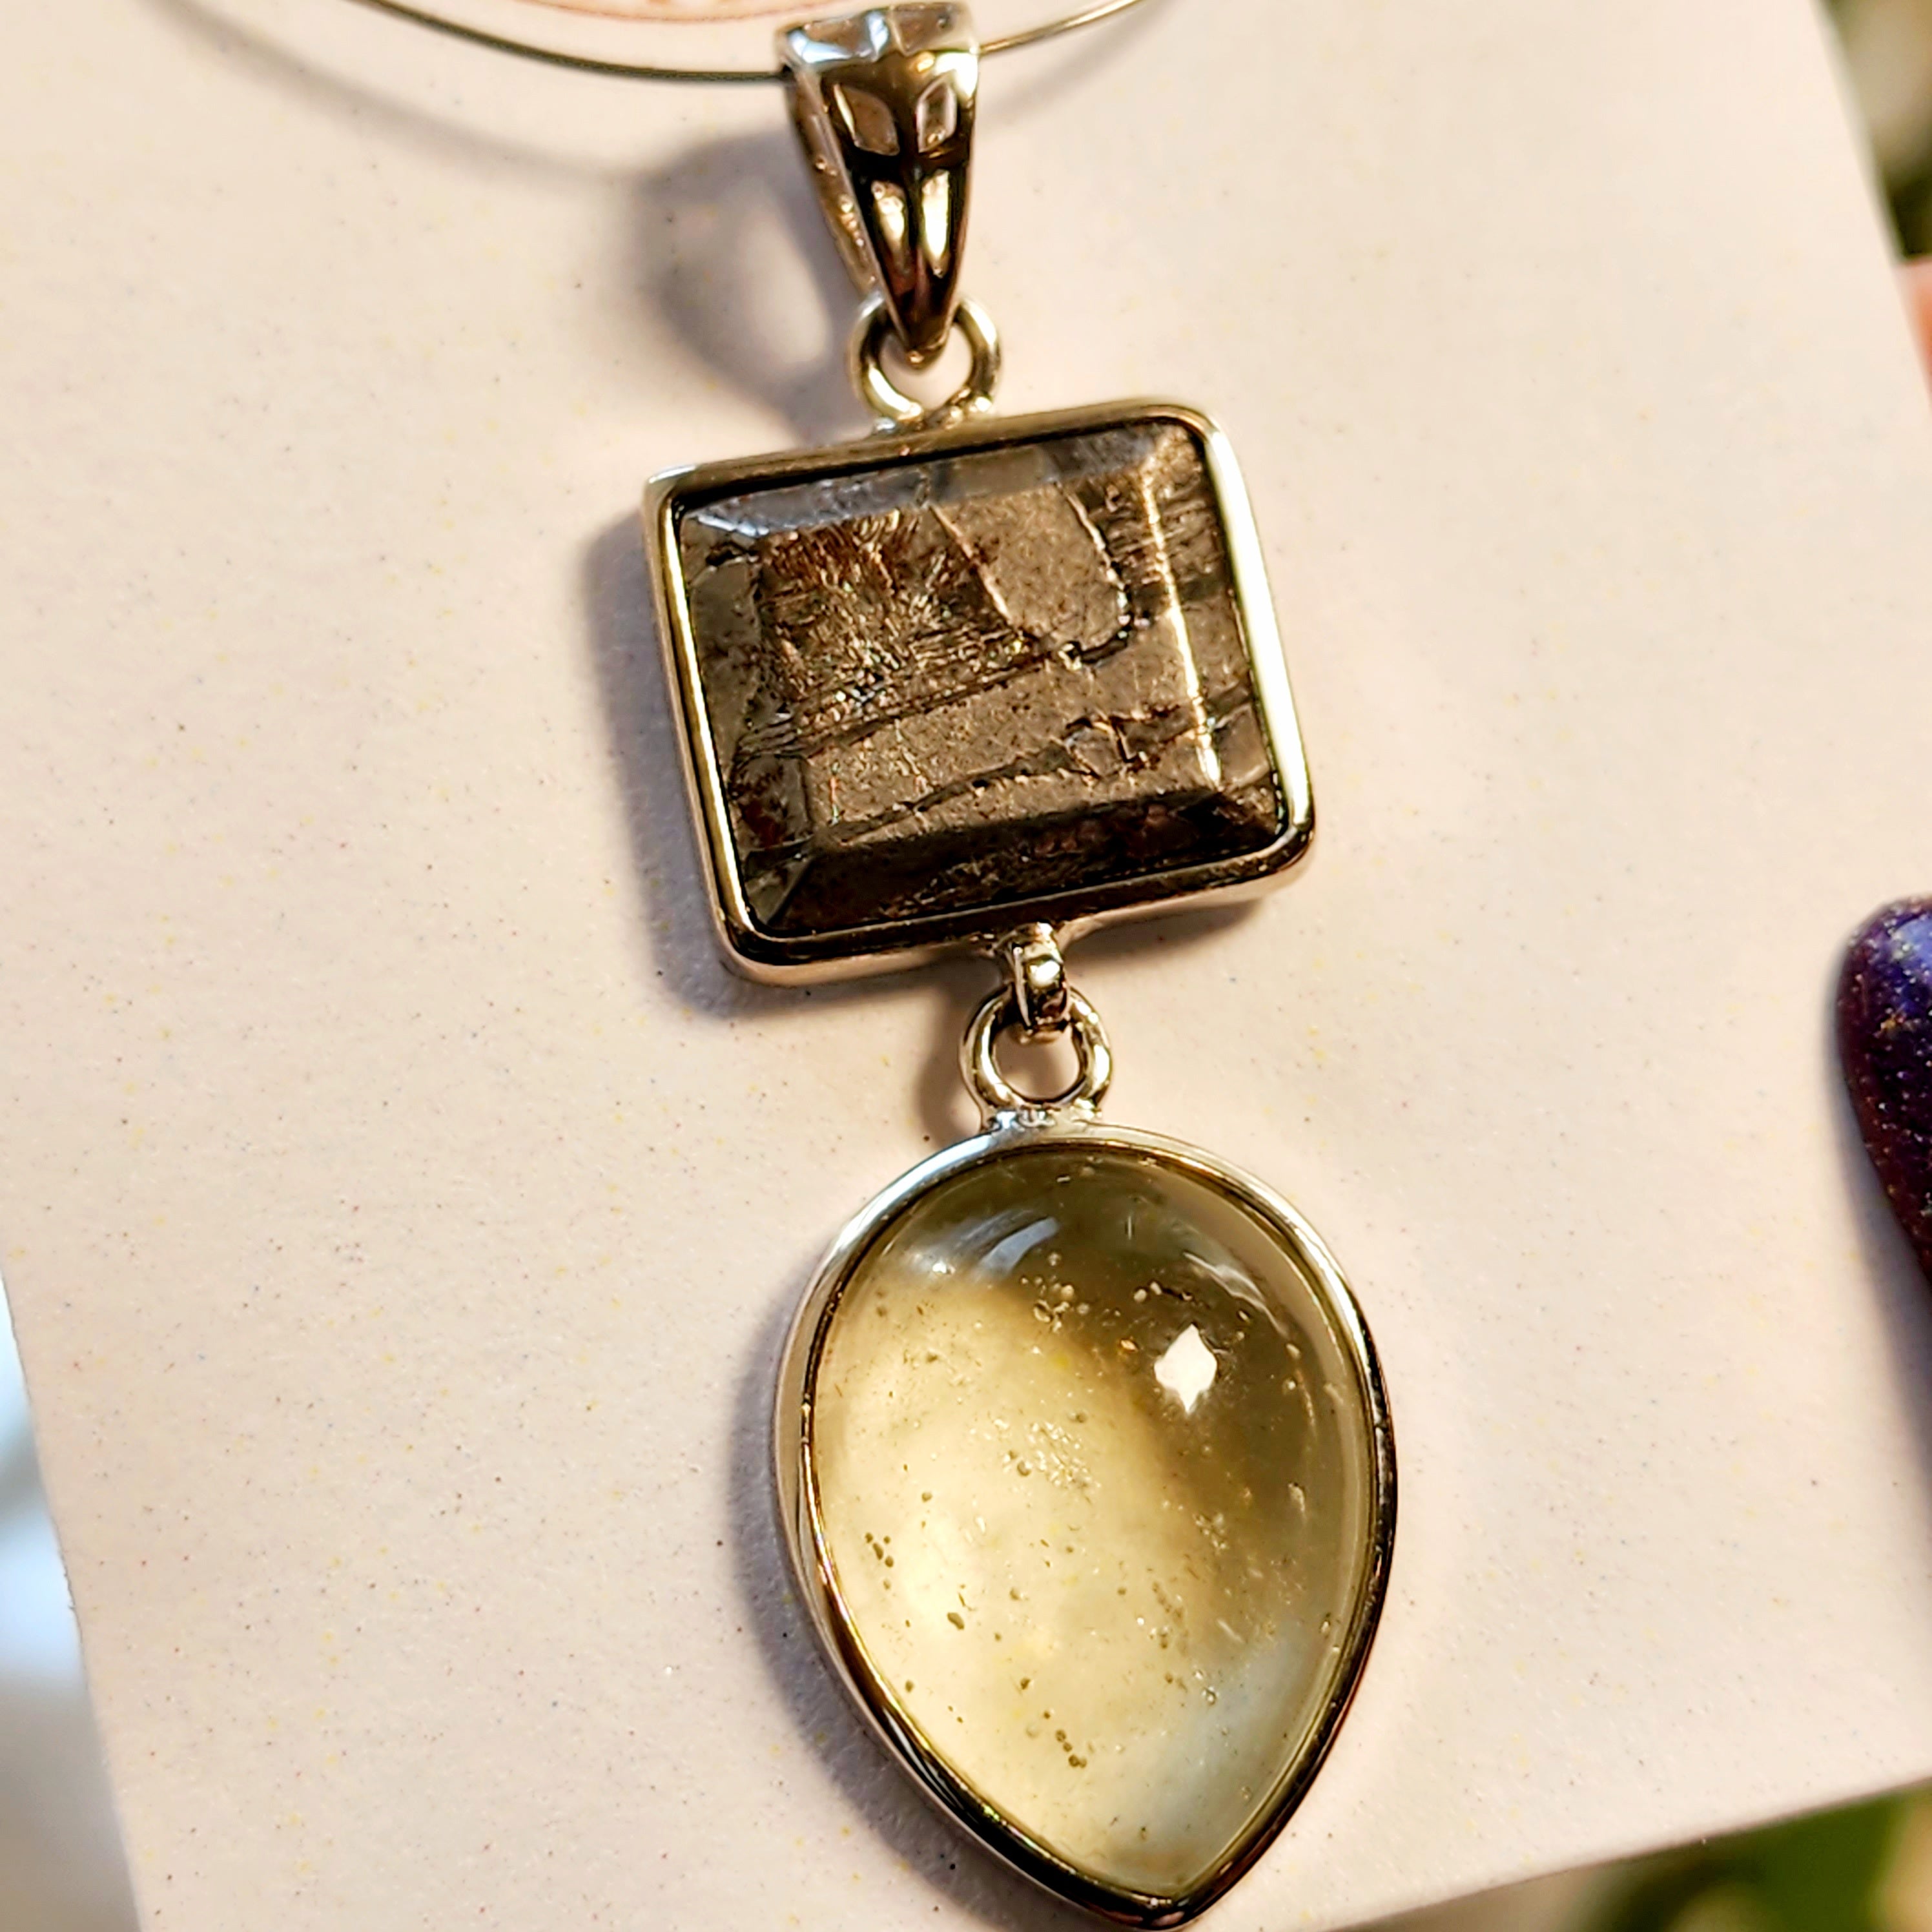 Libyan Desert Glass x Meteorite Pendant .925 Silver for Confidence, Manifesting and Personal Power